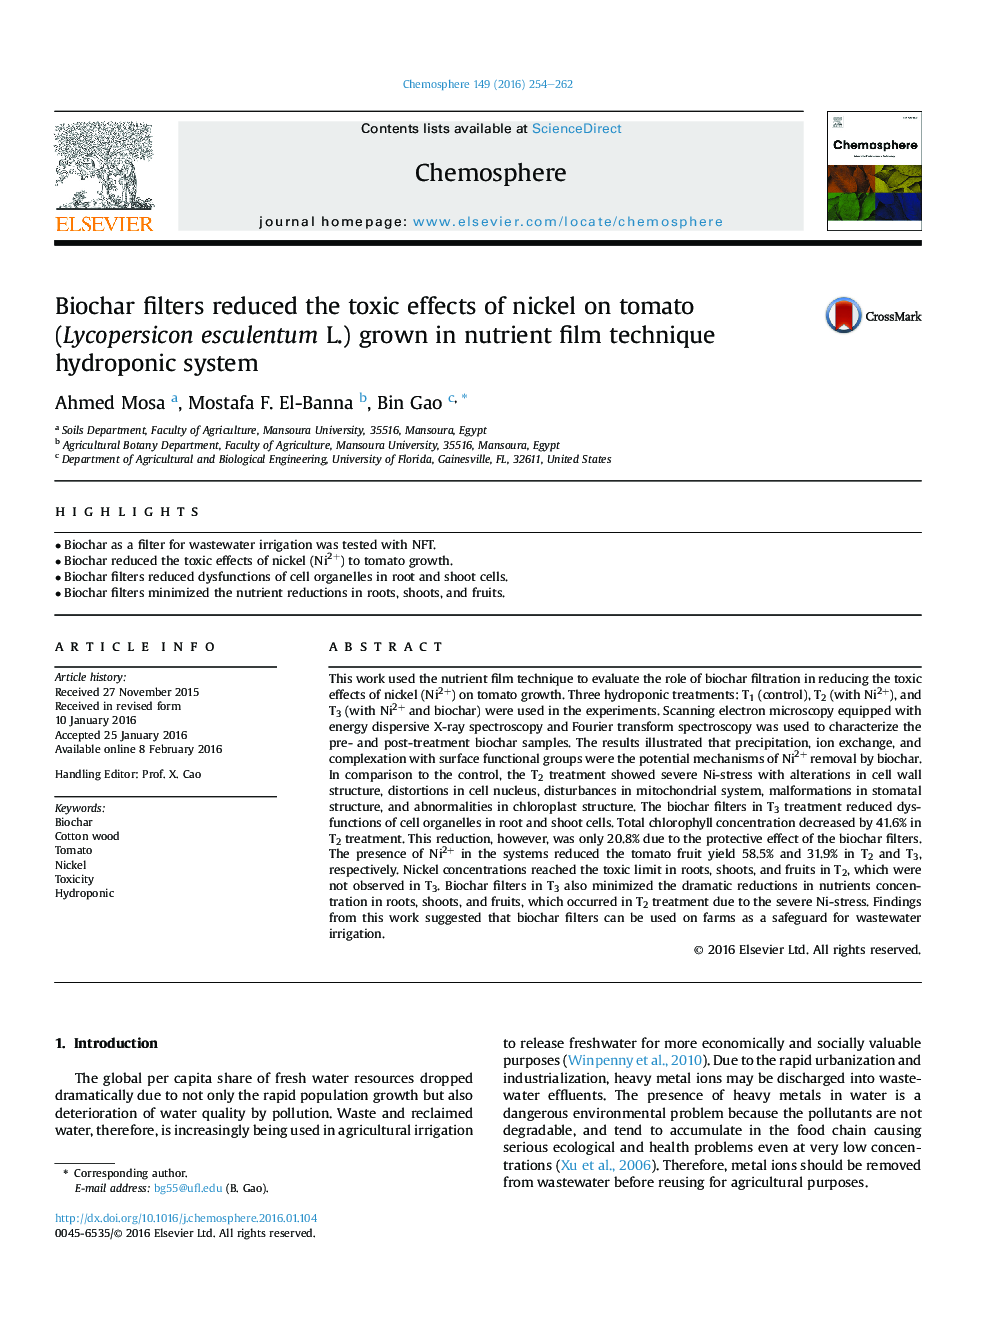 Biochar filters reduced the toxic effects of nickel on tomato (Lycopersicon esculentum L.) grown in nutrient film technique hydroponic system